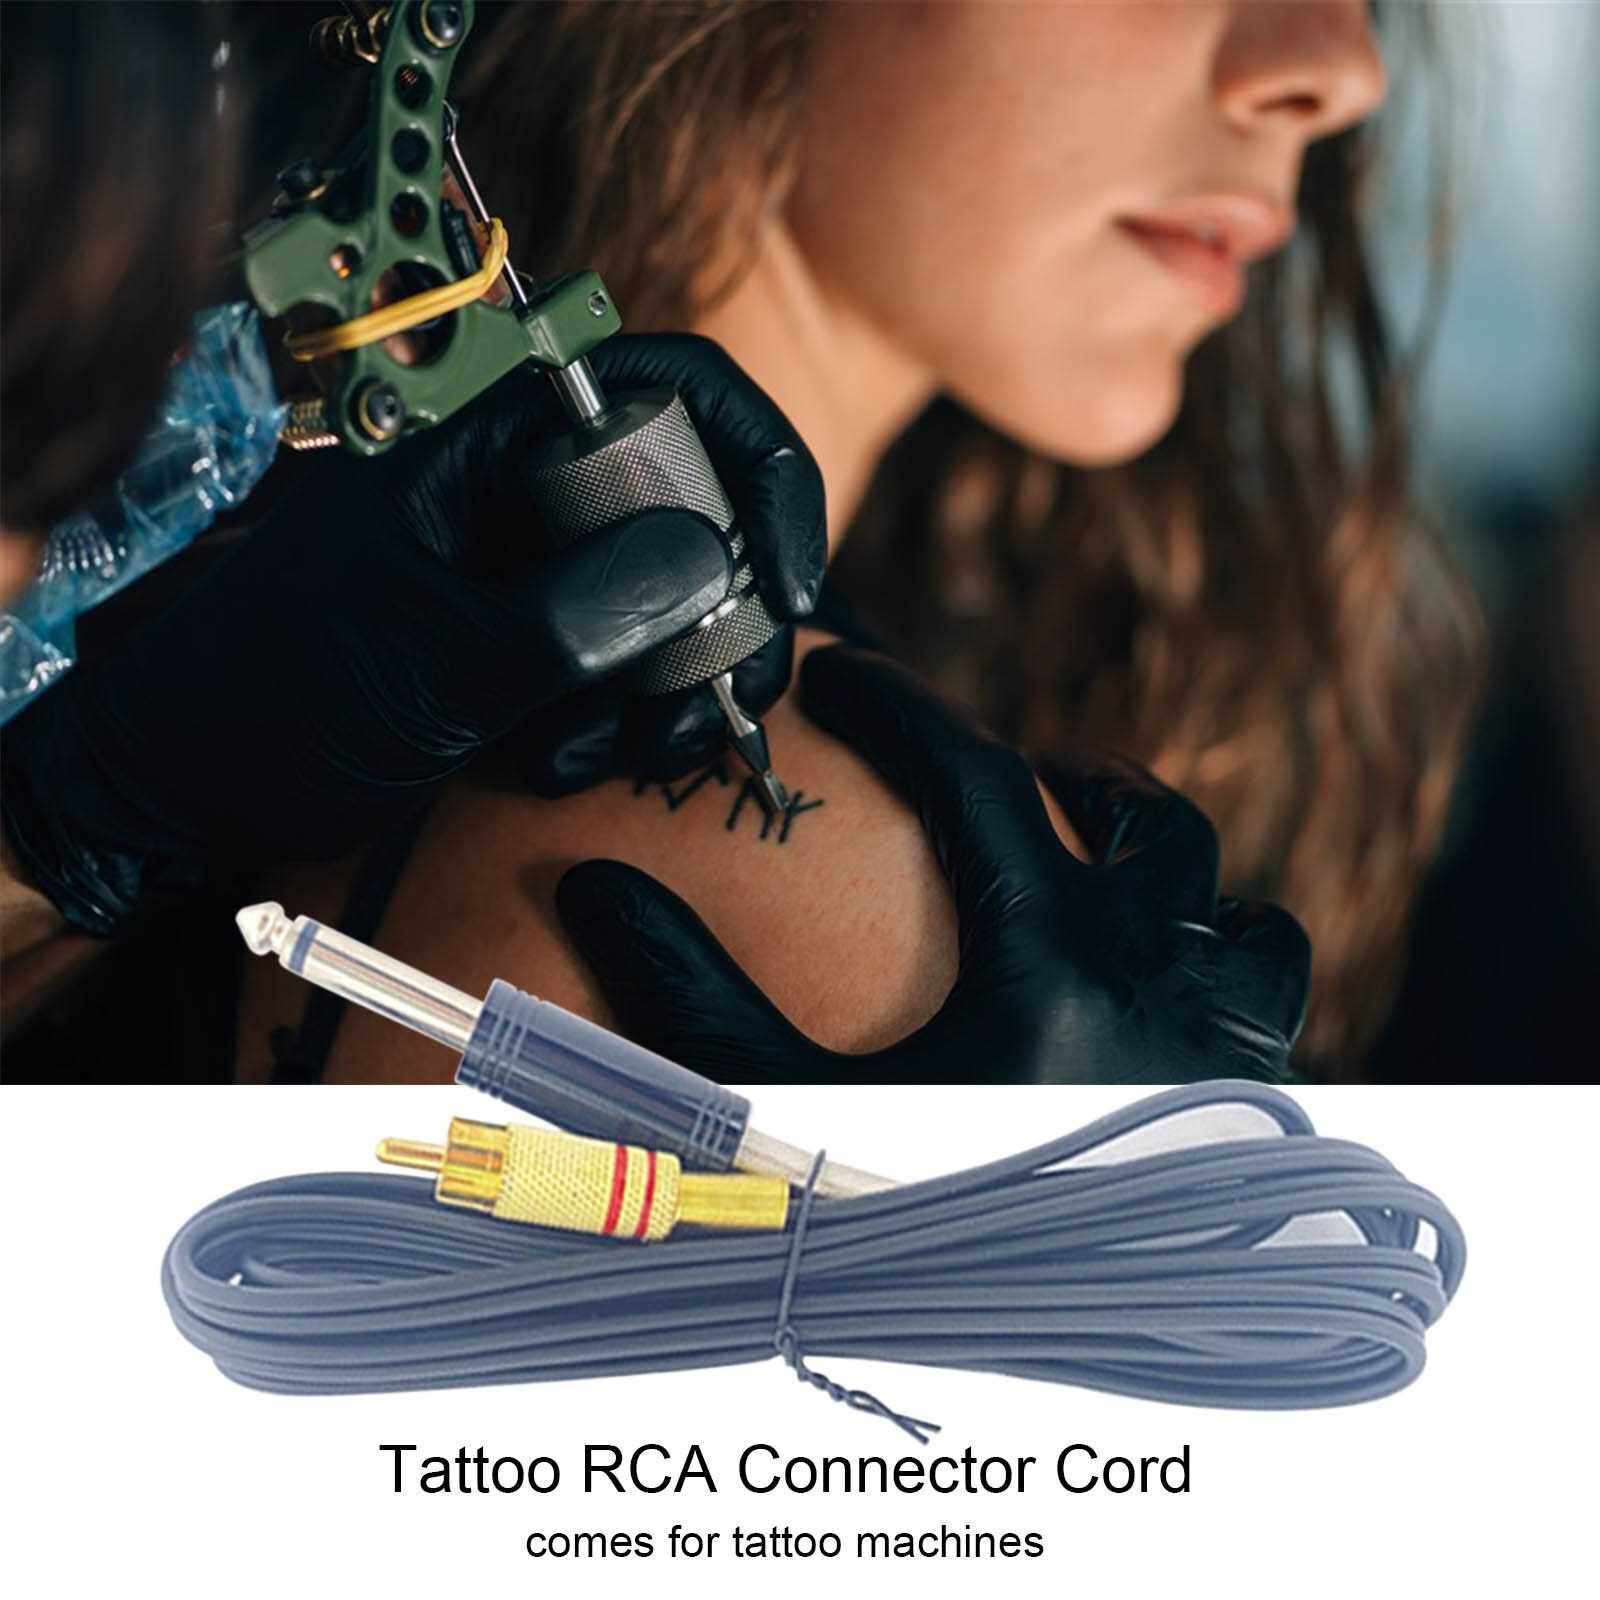 BEST SELLER Silicone Tattoo RCA Connector Cords Cable for Rotary Tattoo Pen Tattoo Machines Power Cord Ultra Soft (Black)